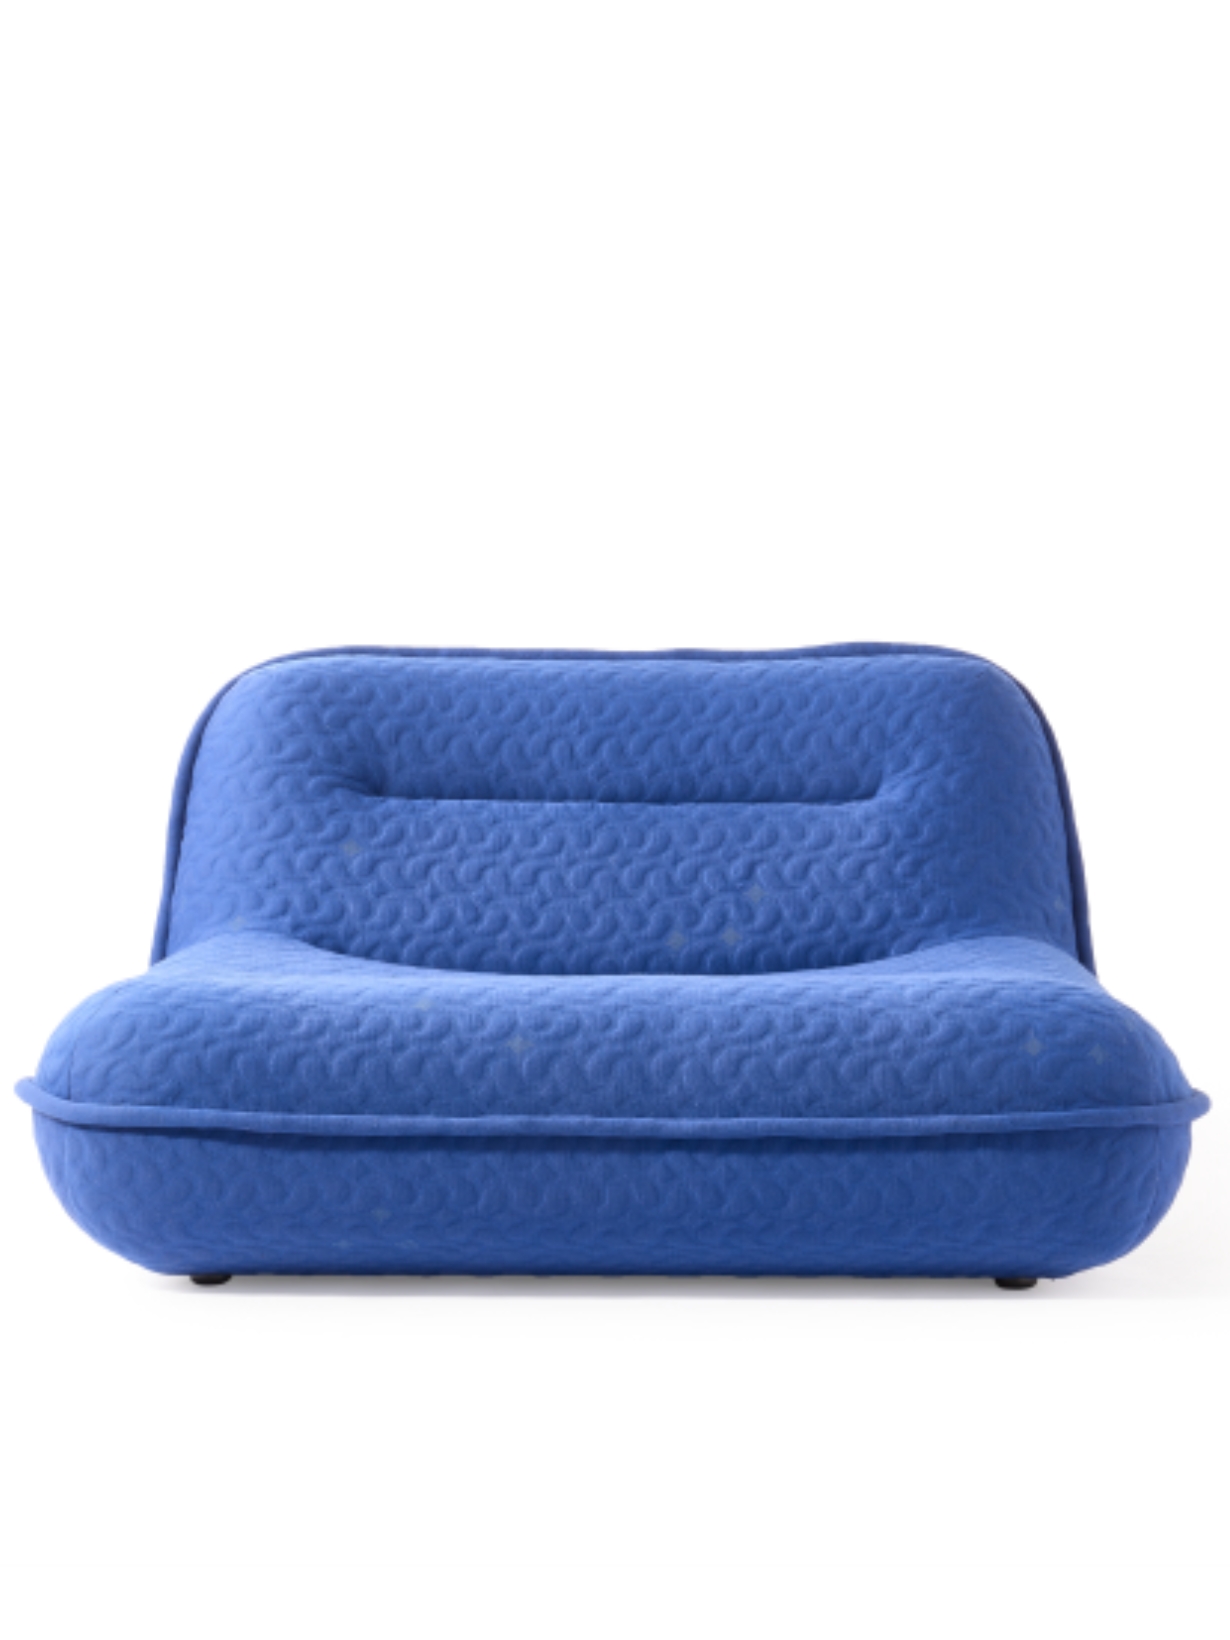 pols potten blue fabric lounge chair, puff 2 places